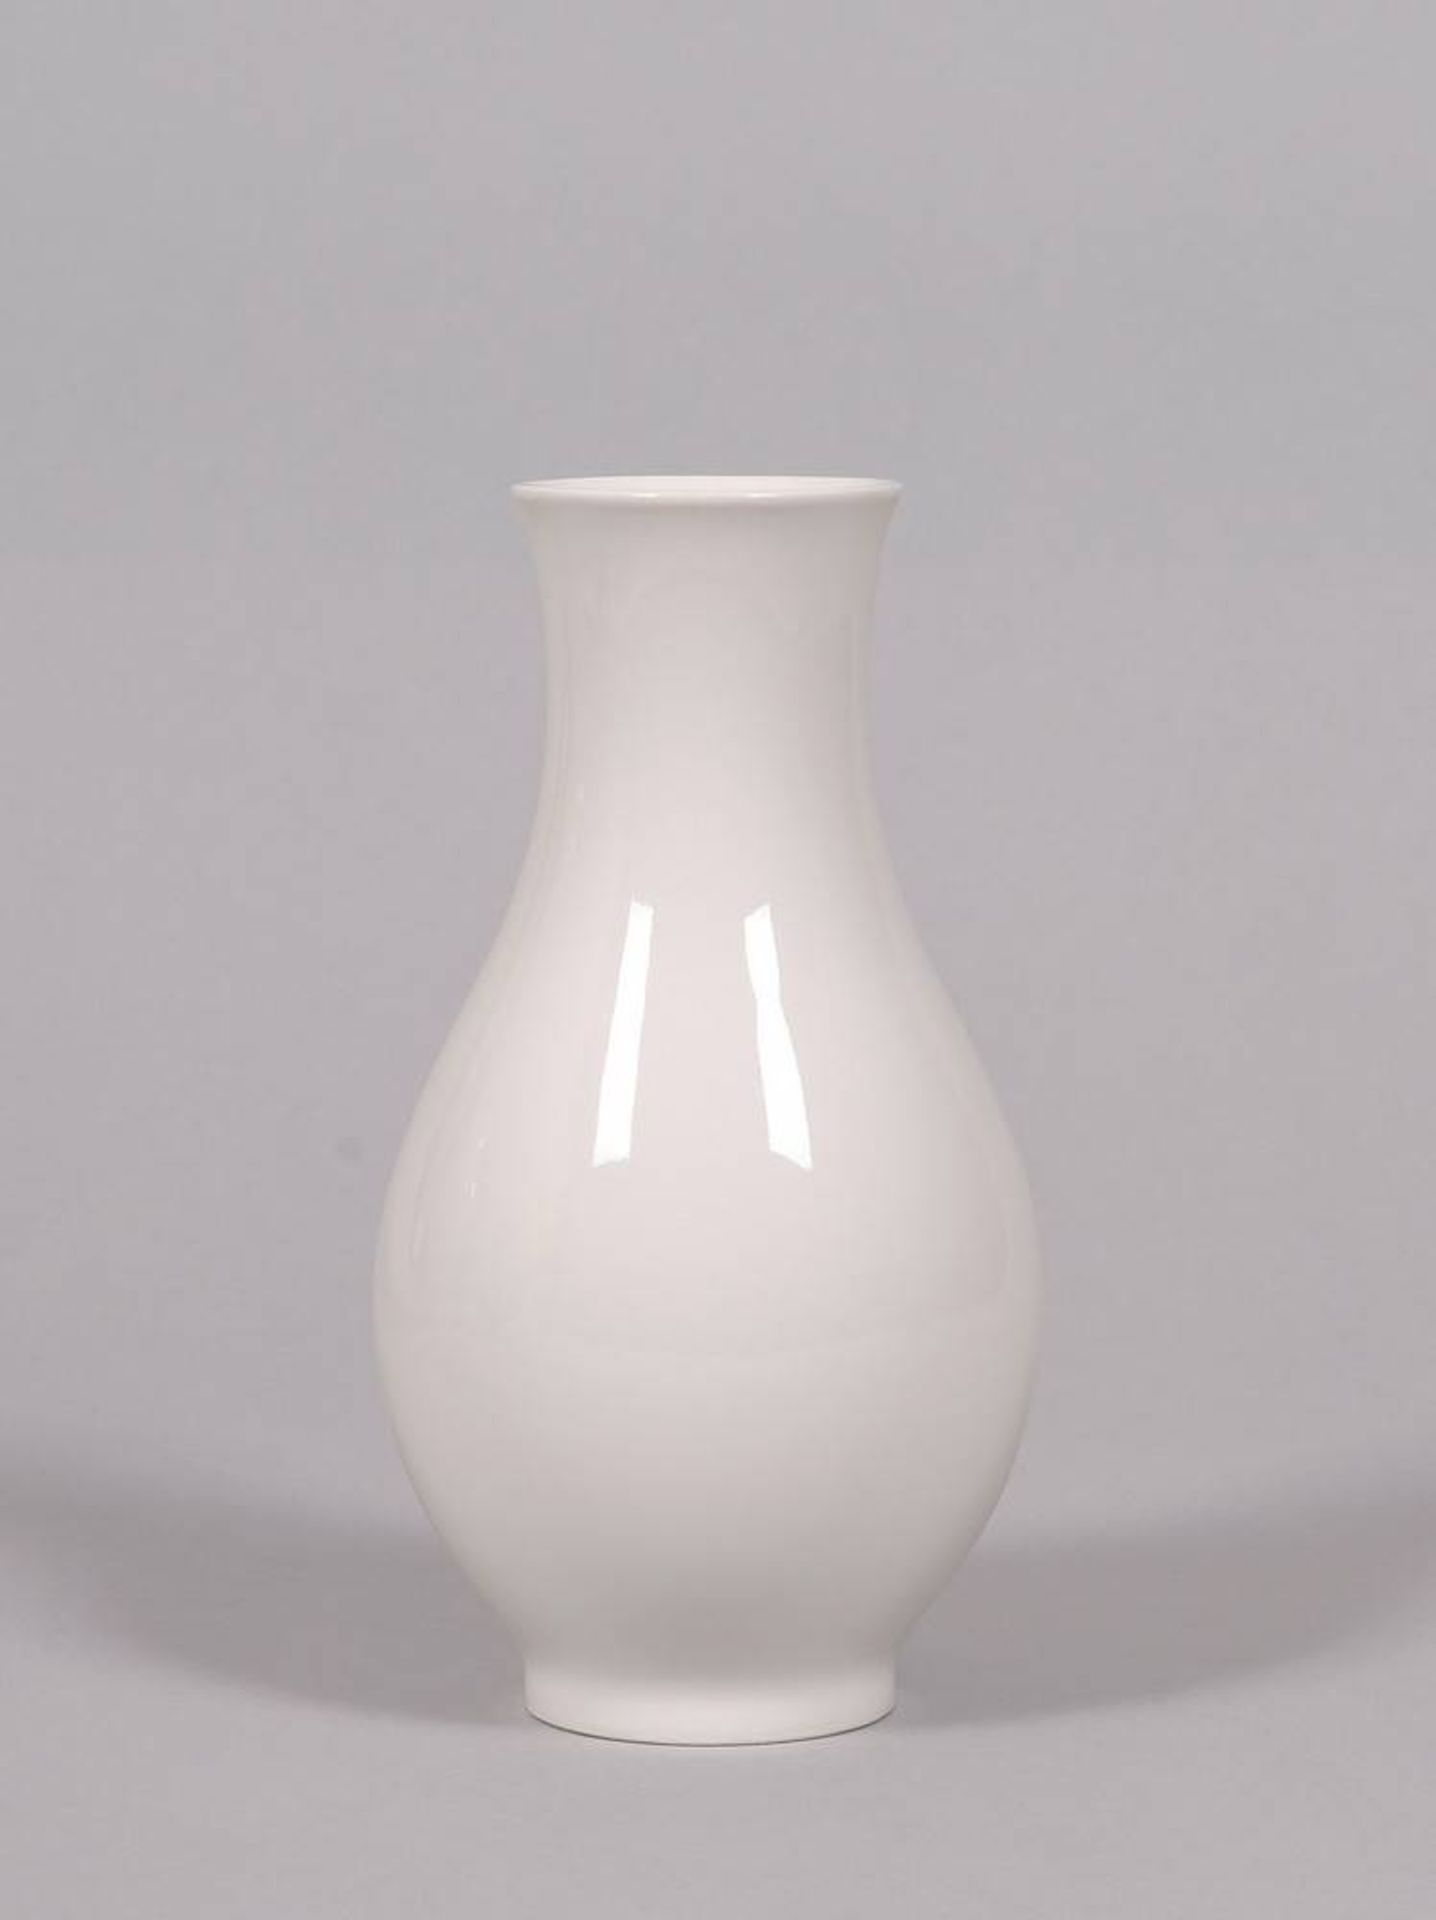 Small vase, KPM-Berlin, production after 1962 